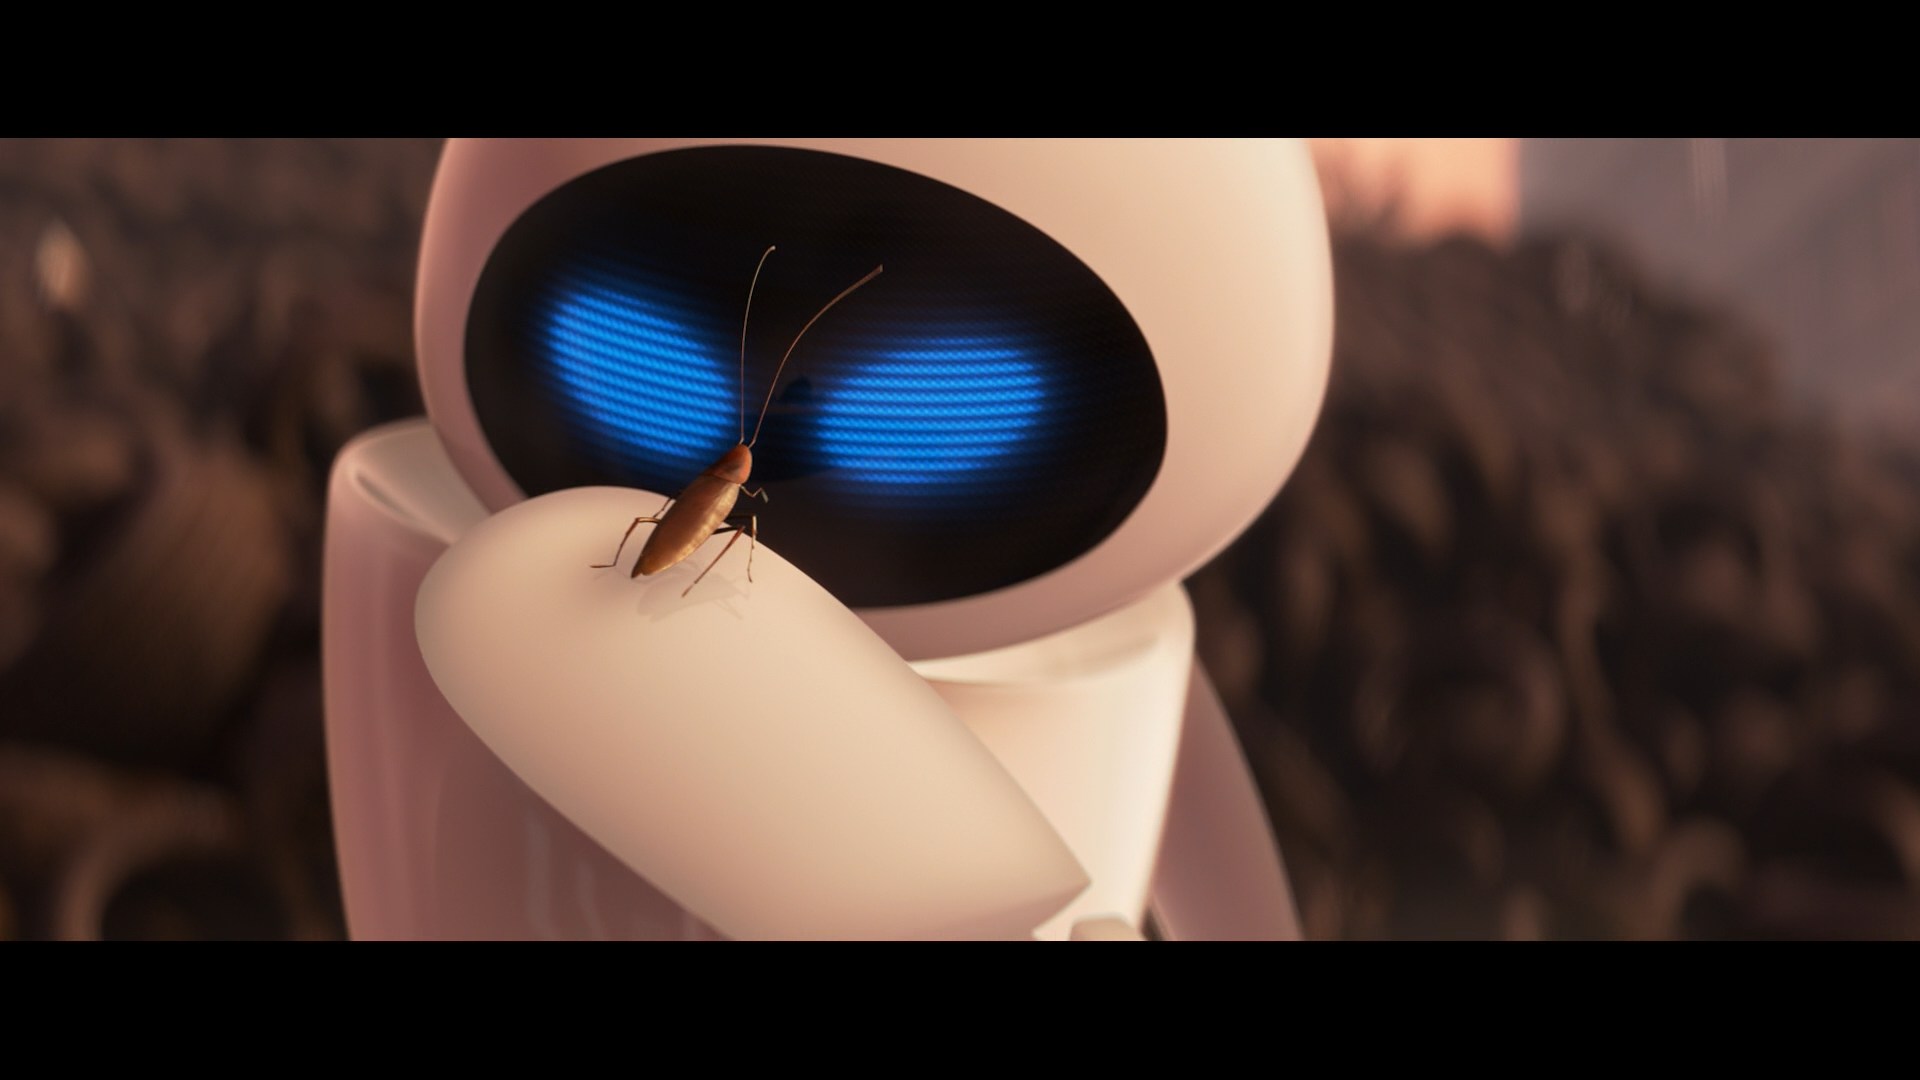 Wall-e, Nuclear Apocalypse - Wall E And The Cockroach - HD Wallpaper 